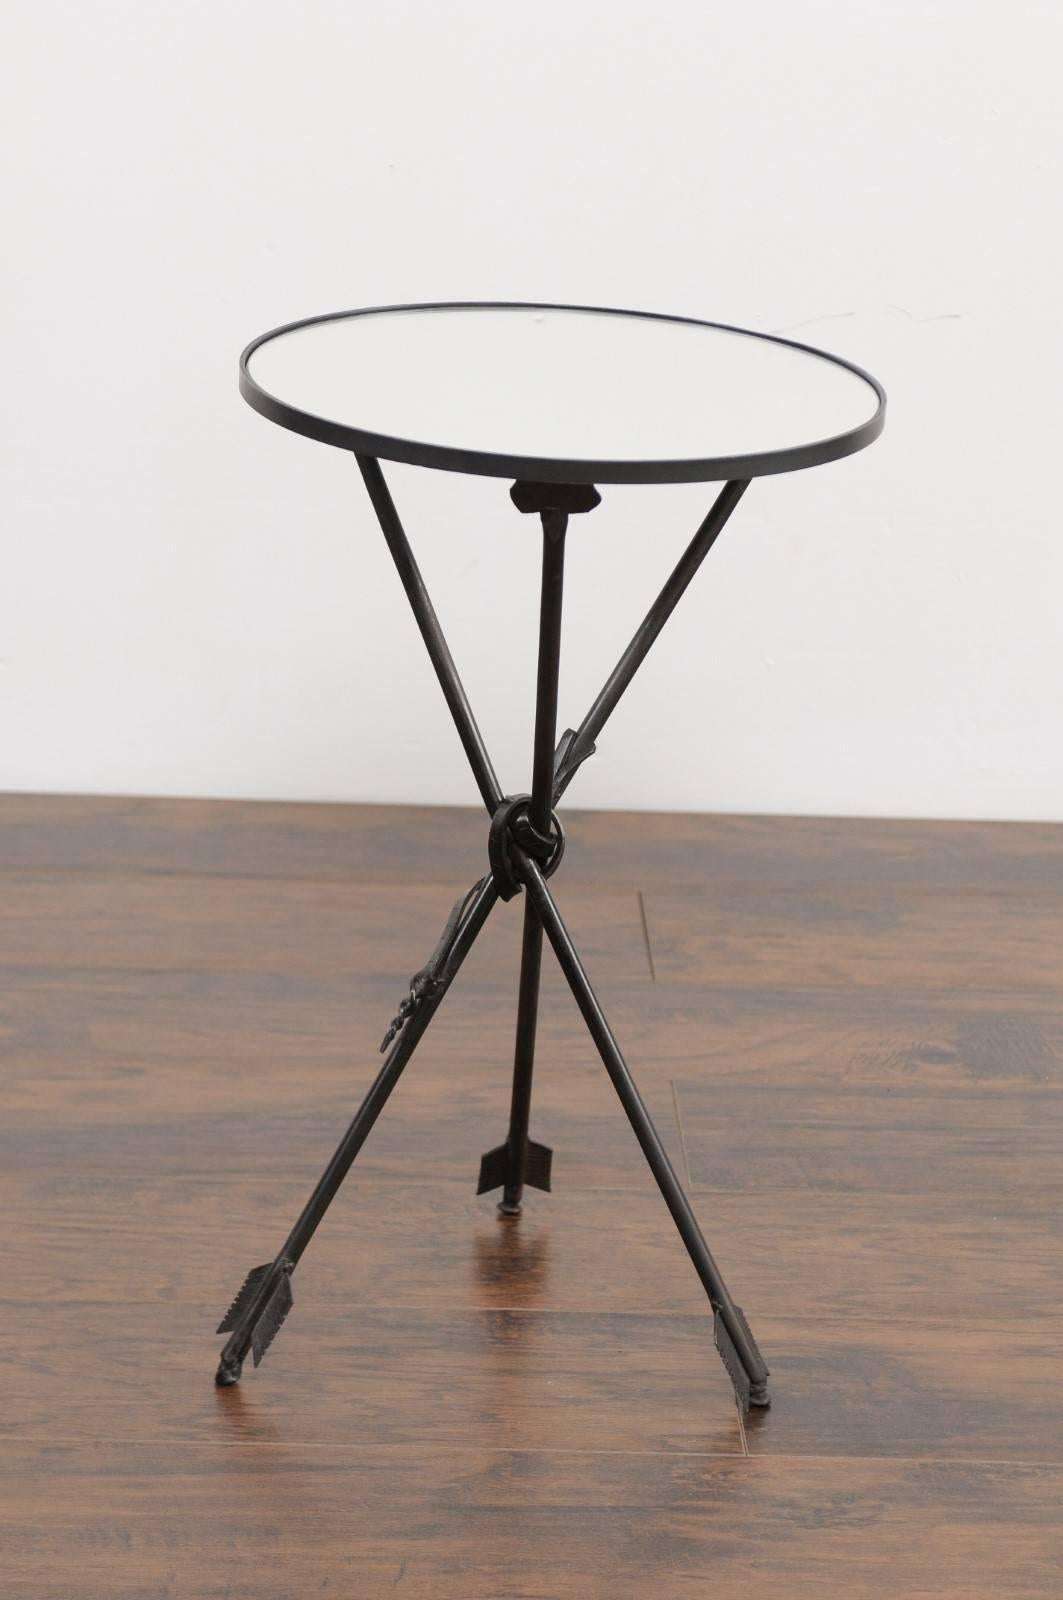 A French vintage round iron side table from the first half of the 20th century with arrow legs and new mirrored top. This French side table features a circular top, adorned with a new custom-made mirror. The table is raised on an exquisite black